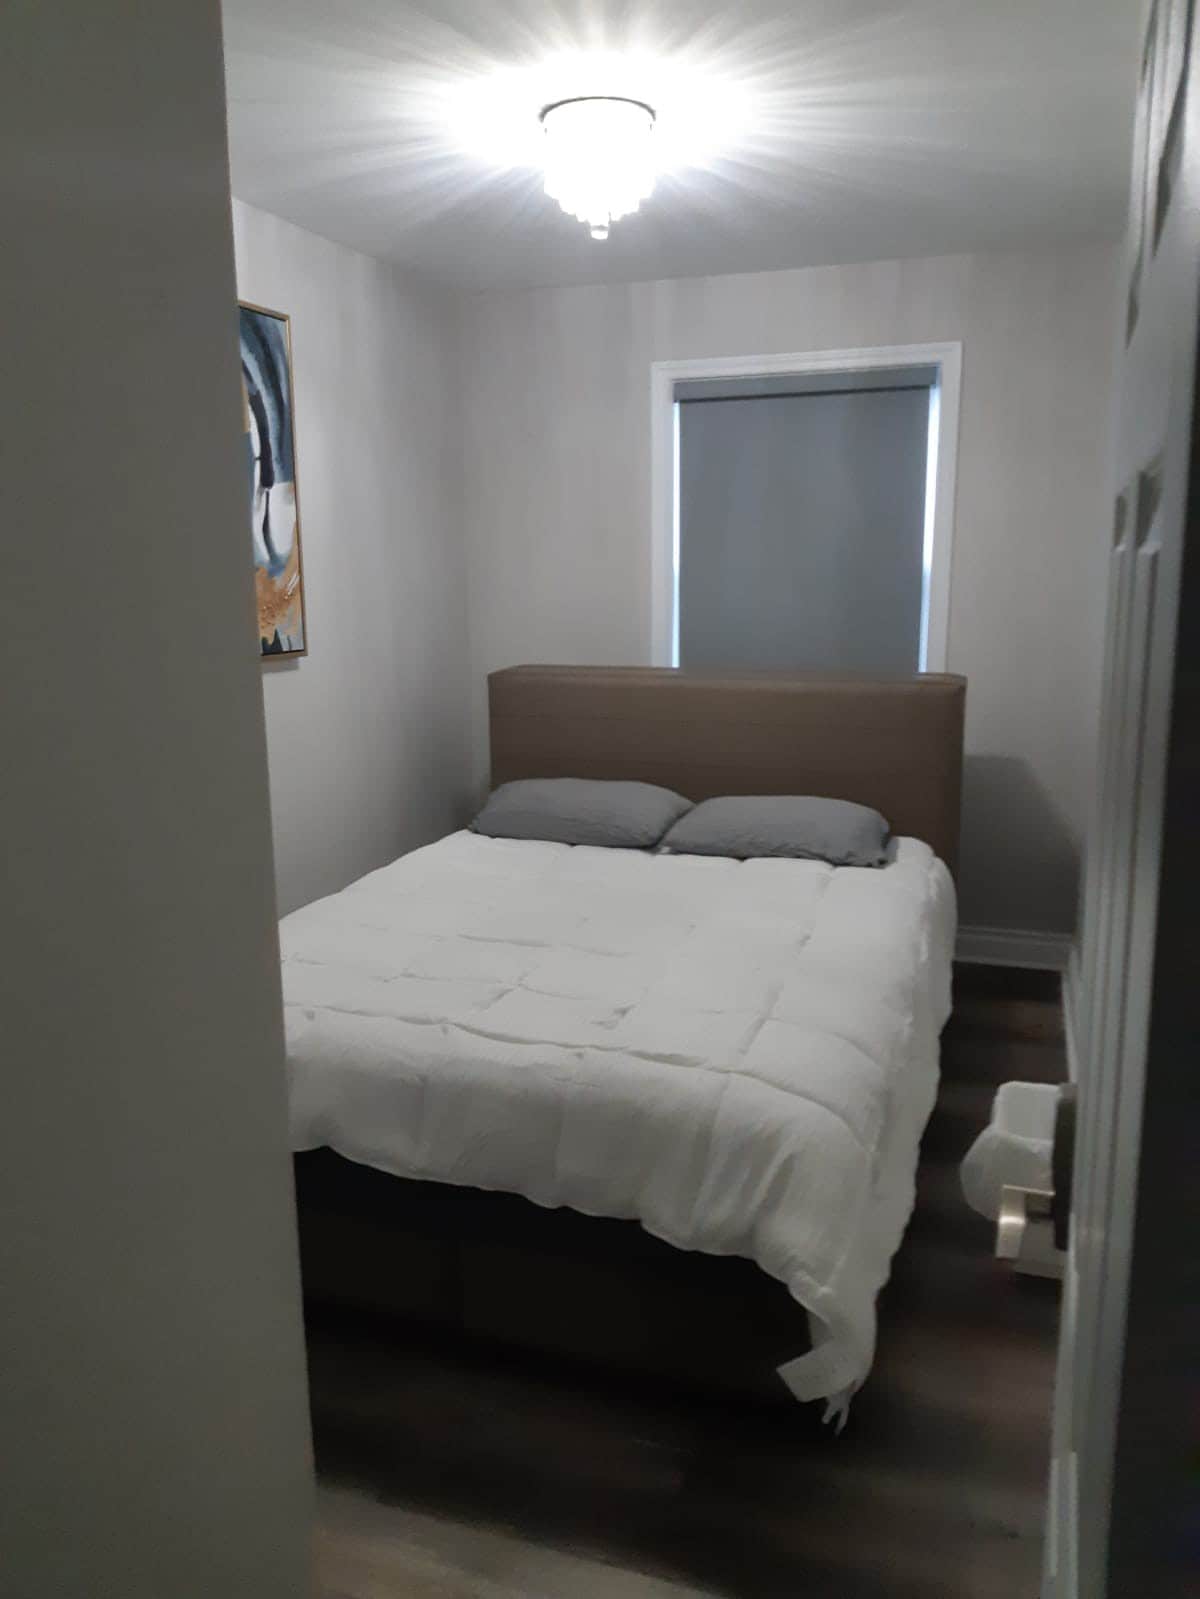 2 BRs Apartment 5 Mins From Humber River Hospital